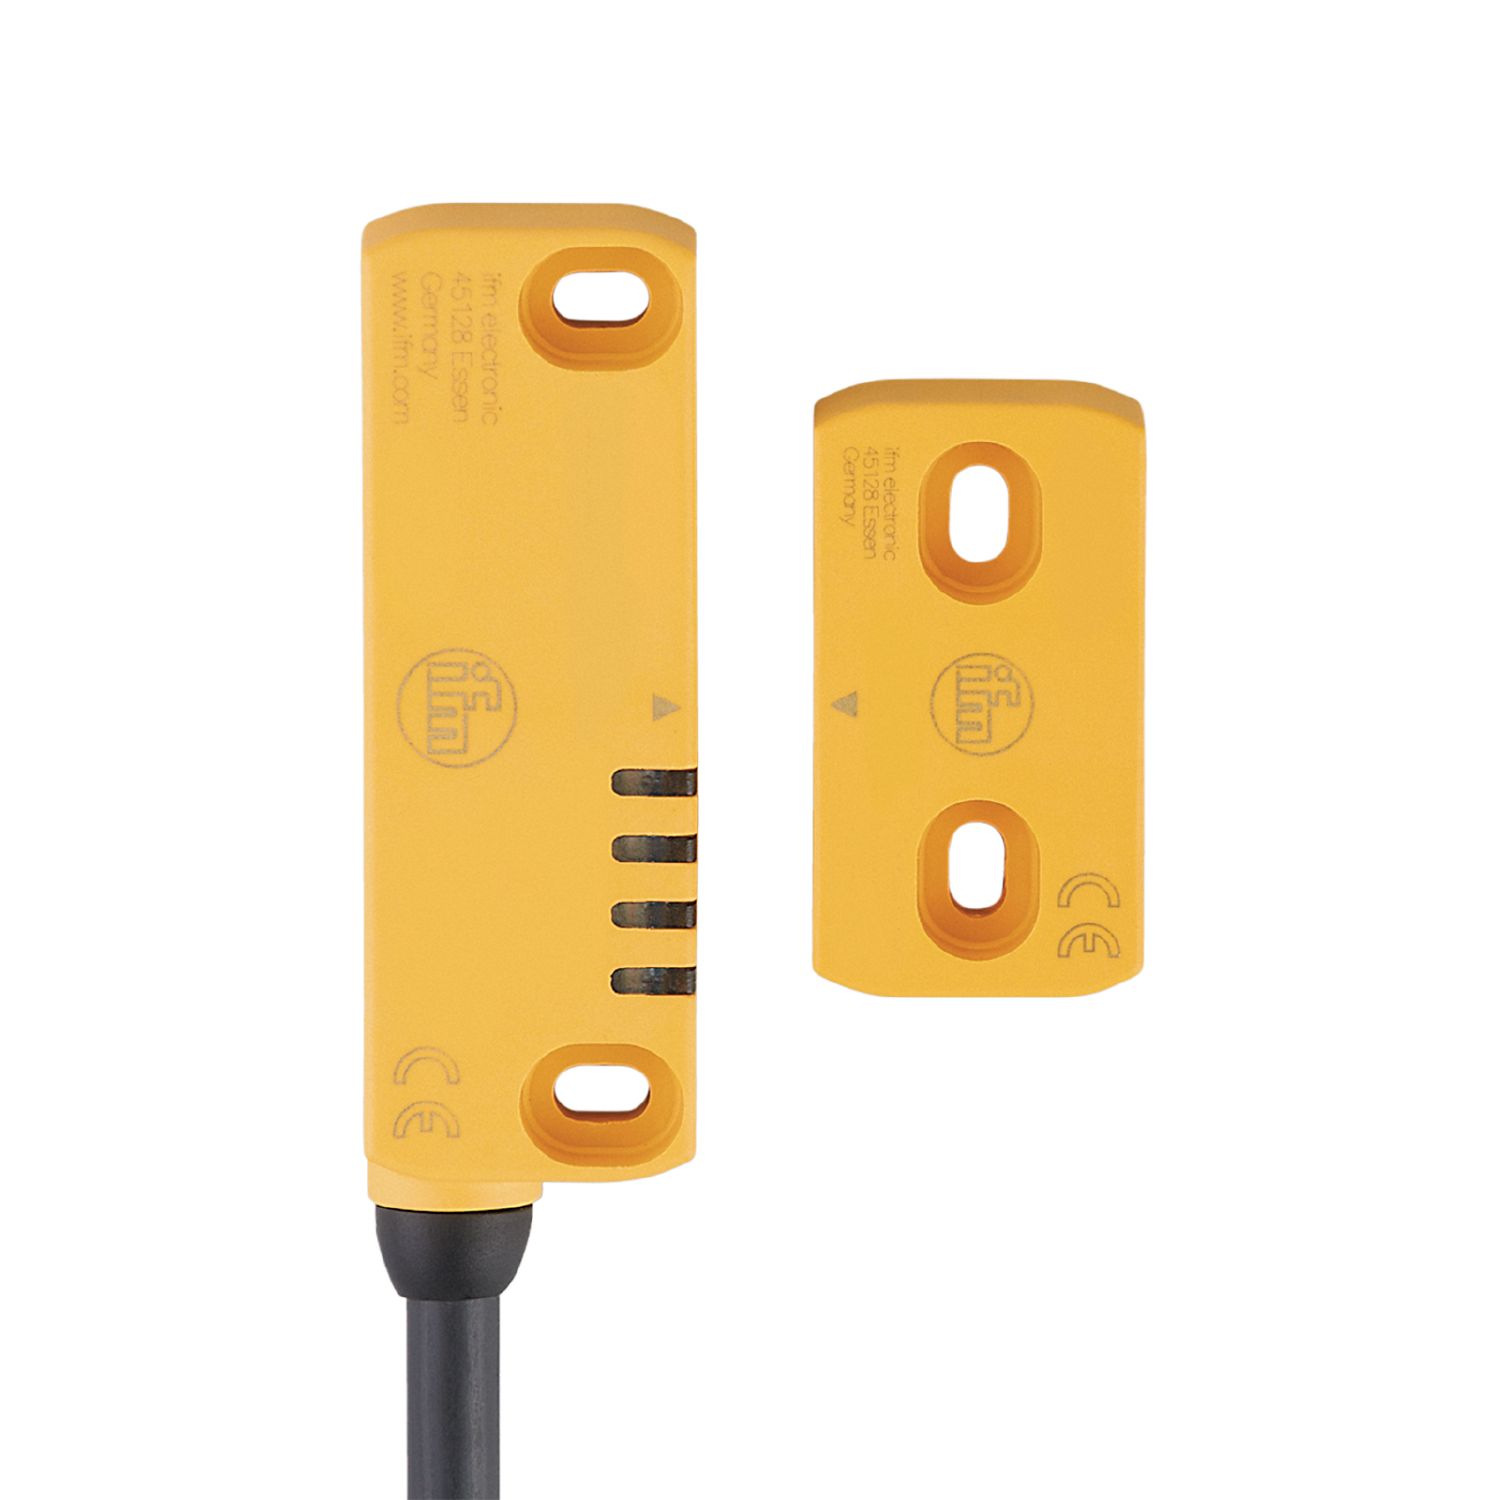 MN704S - RFID-coded safety sensor - ifm